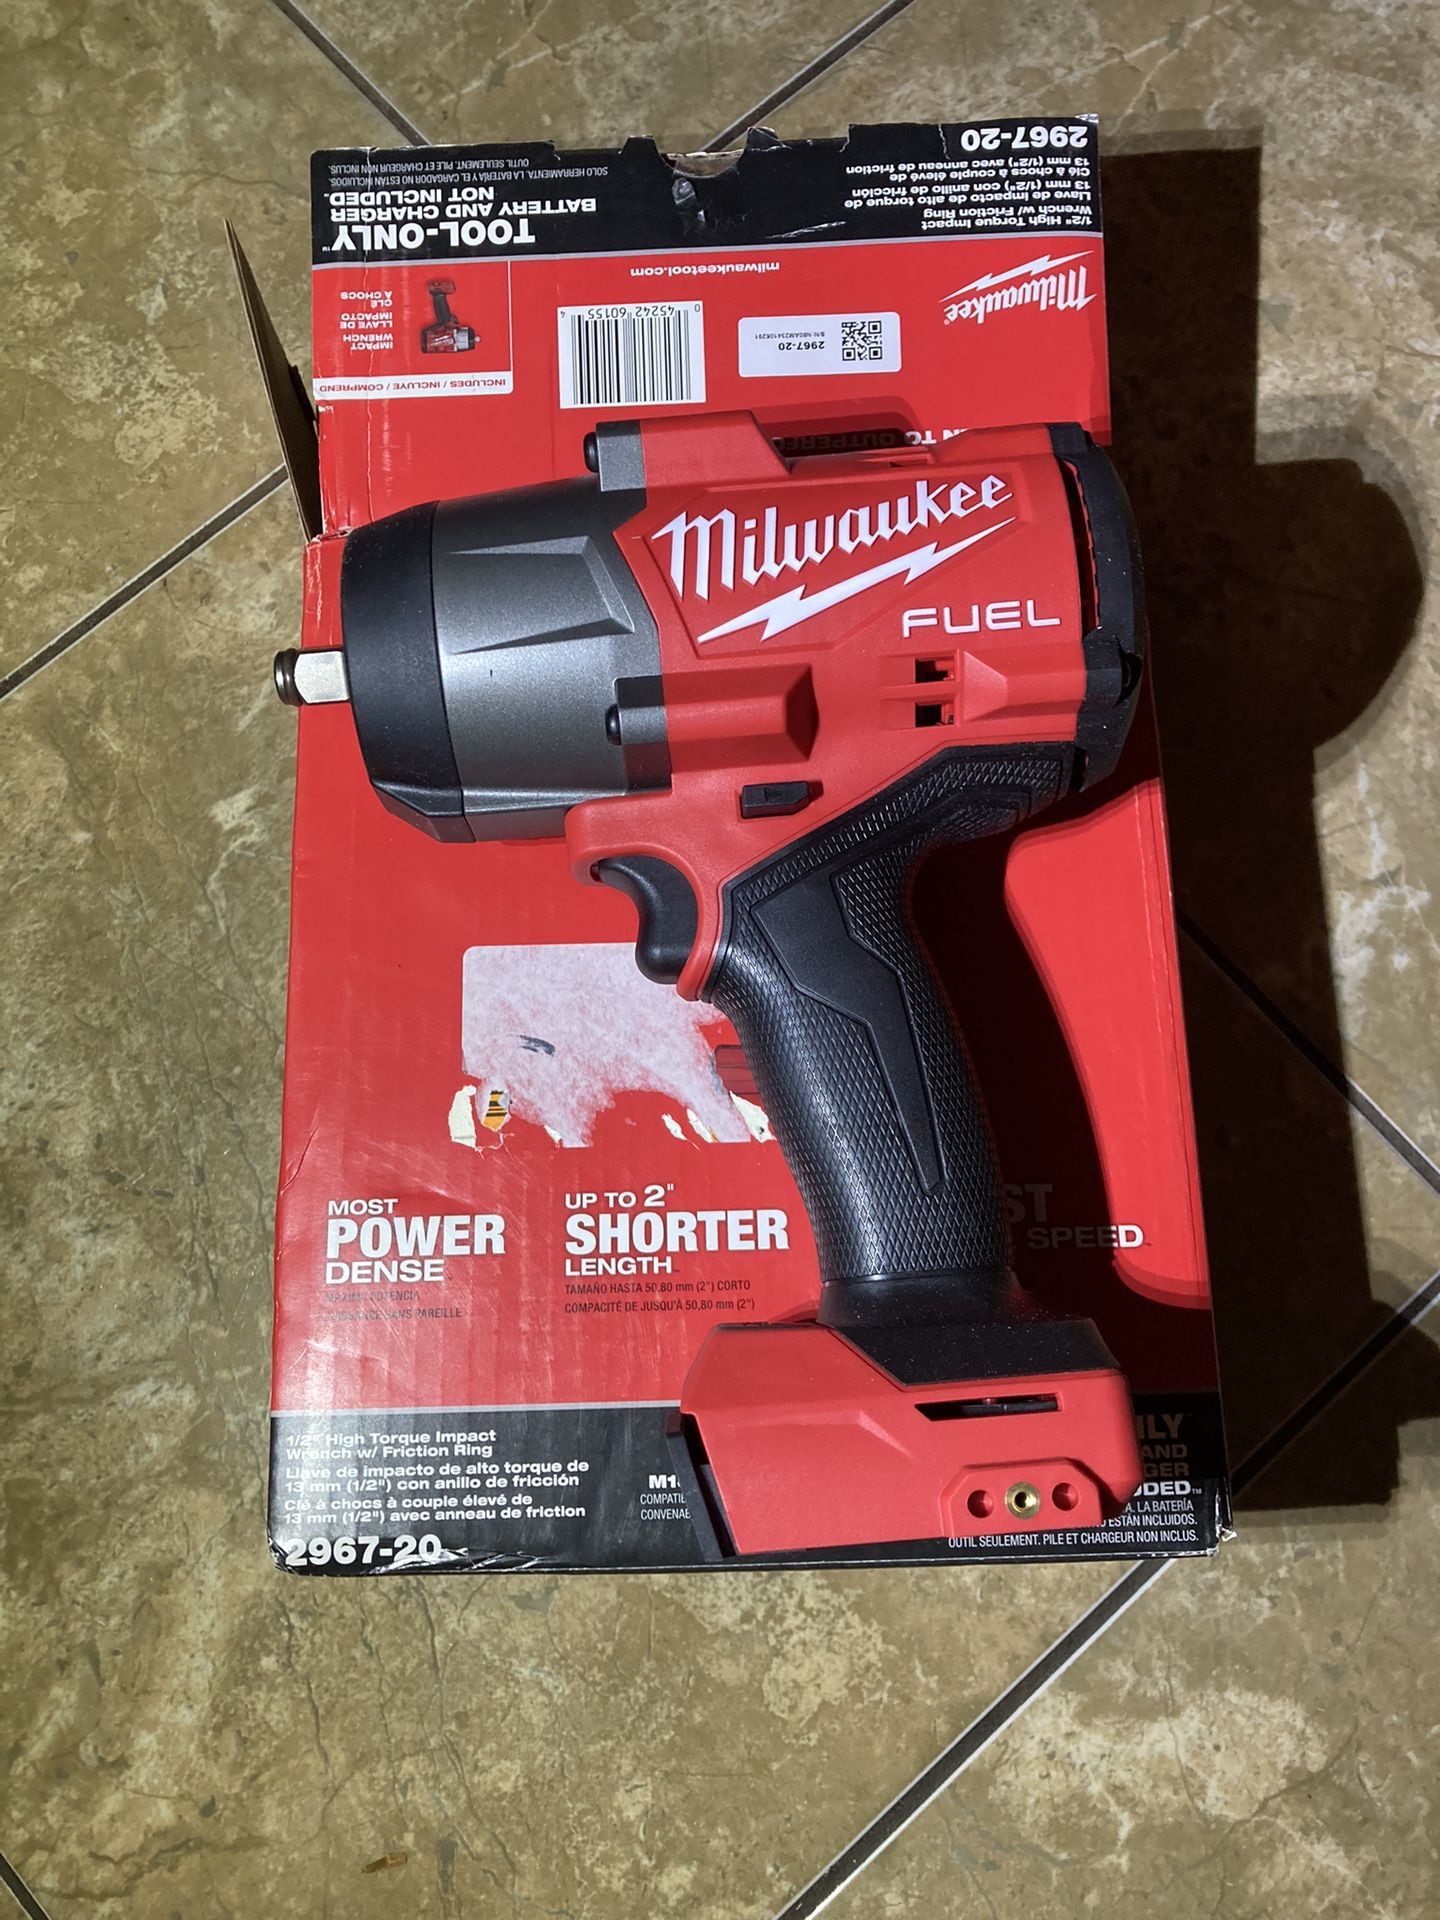 Milwaukee 2967-20 M18 FUEL 18V 1/2 in High Torque Impact Wrench